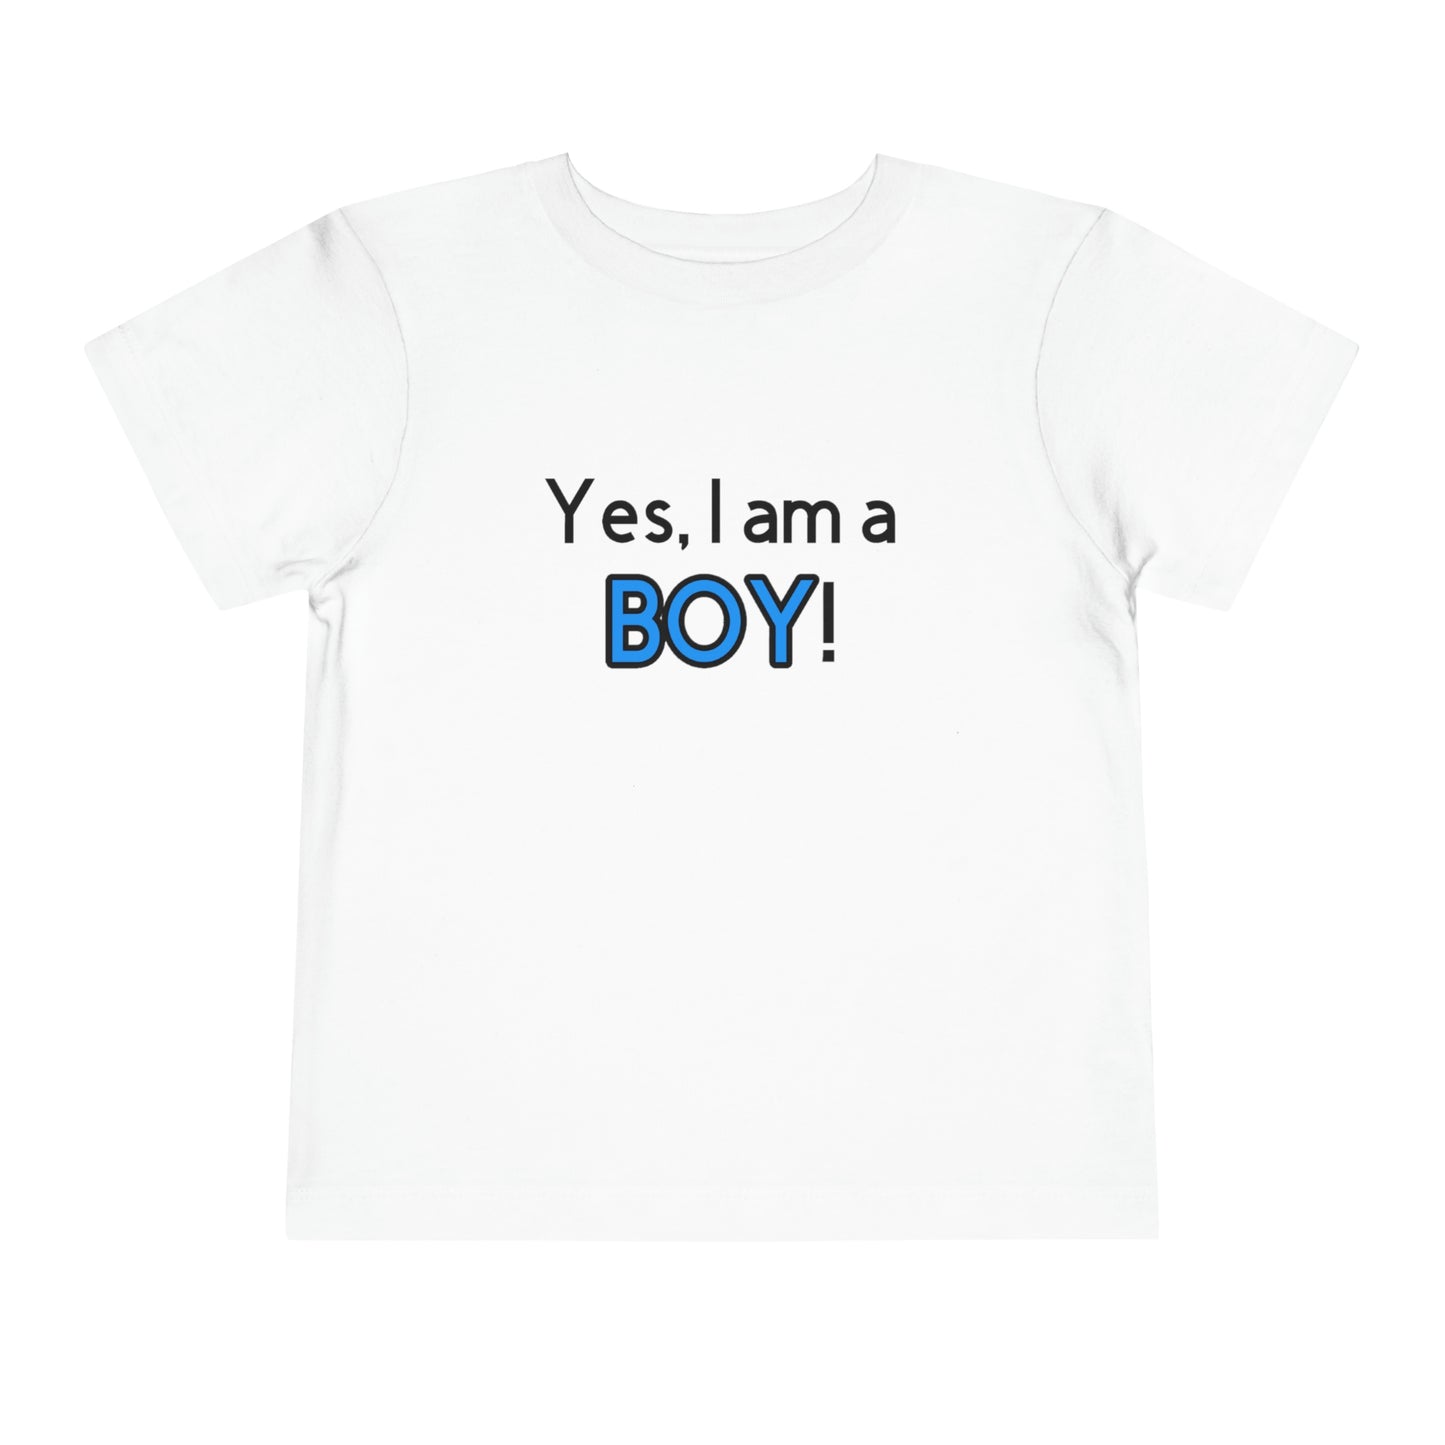 Yes, I am a BOY! Toddler Tee